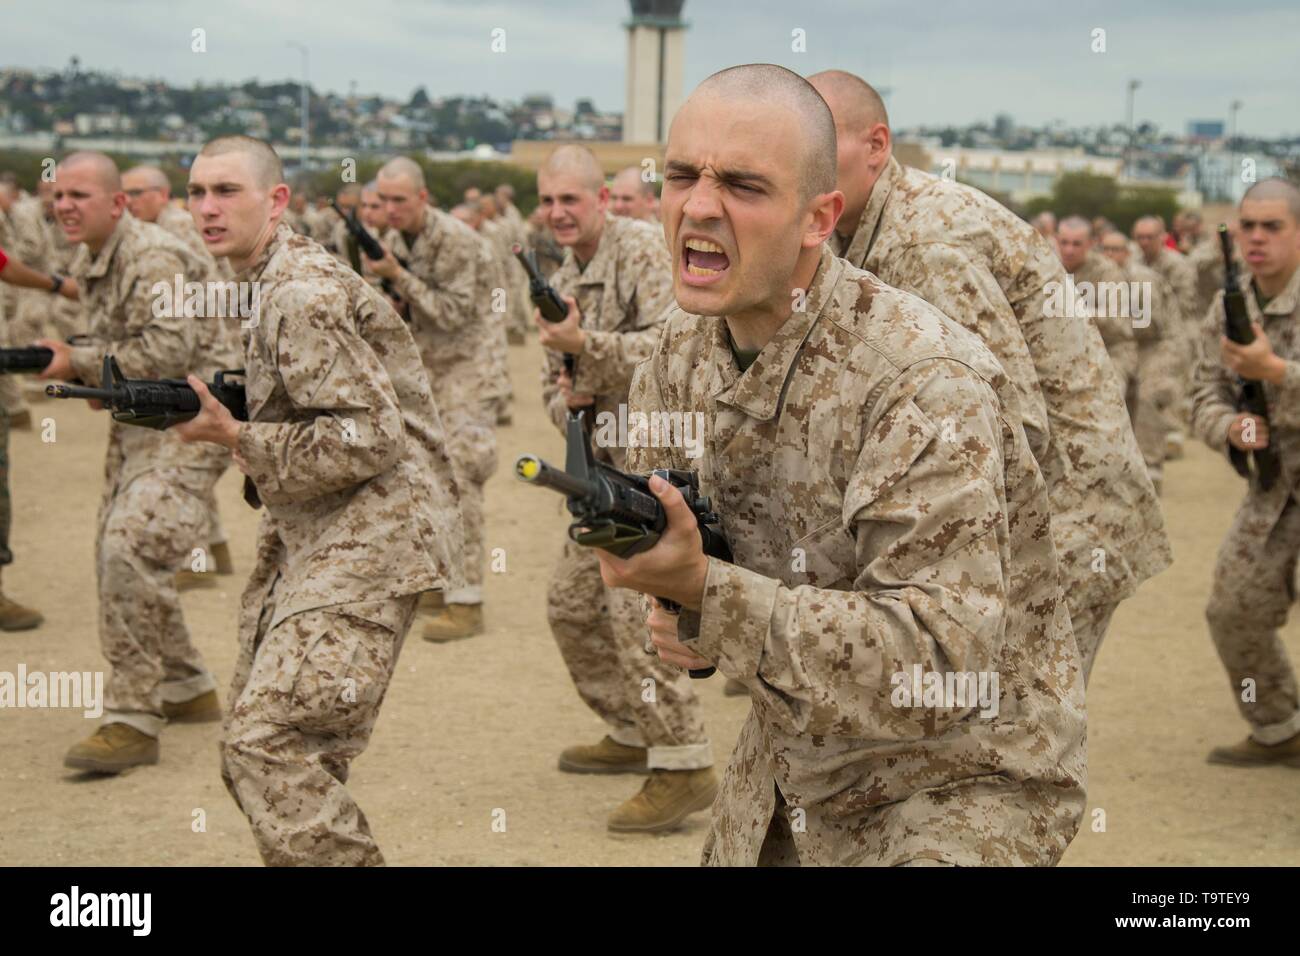 U.S. Marine recruits with Bravo Company, 1st Recruit Training Battalion, practice bayonet techniques during the Bayonet Assault Course at Marine Corps Recruit Depot San Diego May 15, 2019 in San Diego, California. Stock Photo